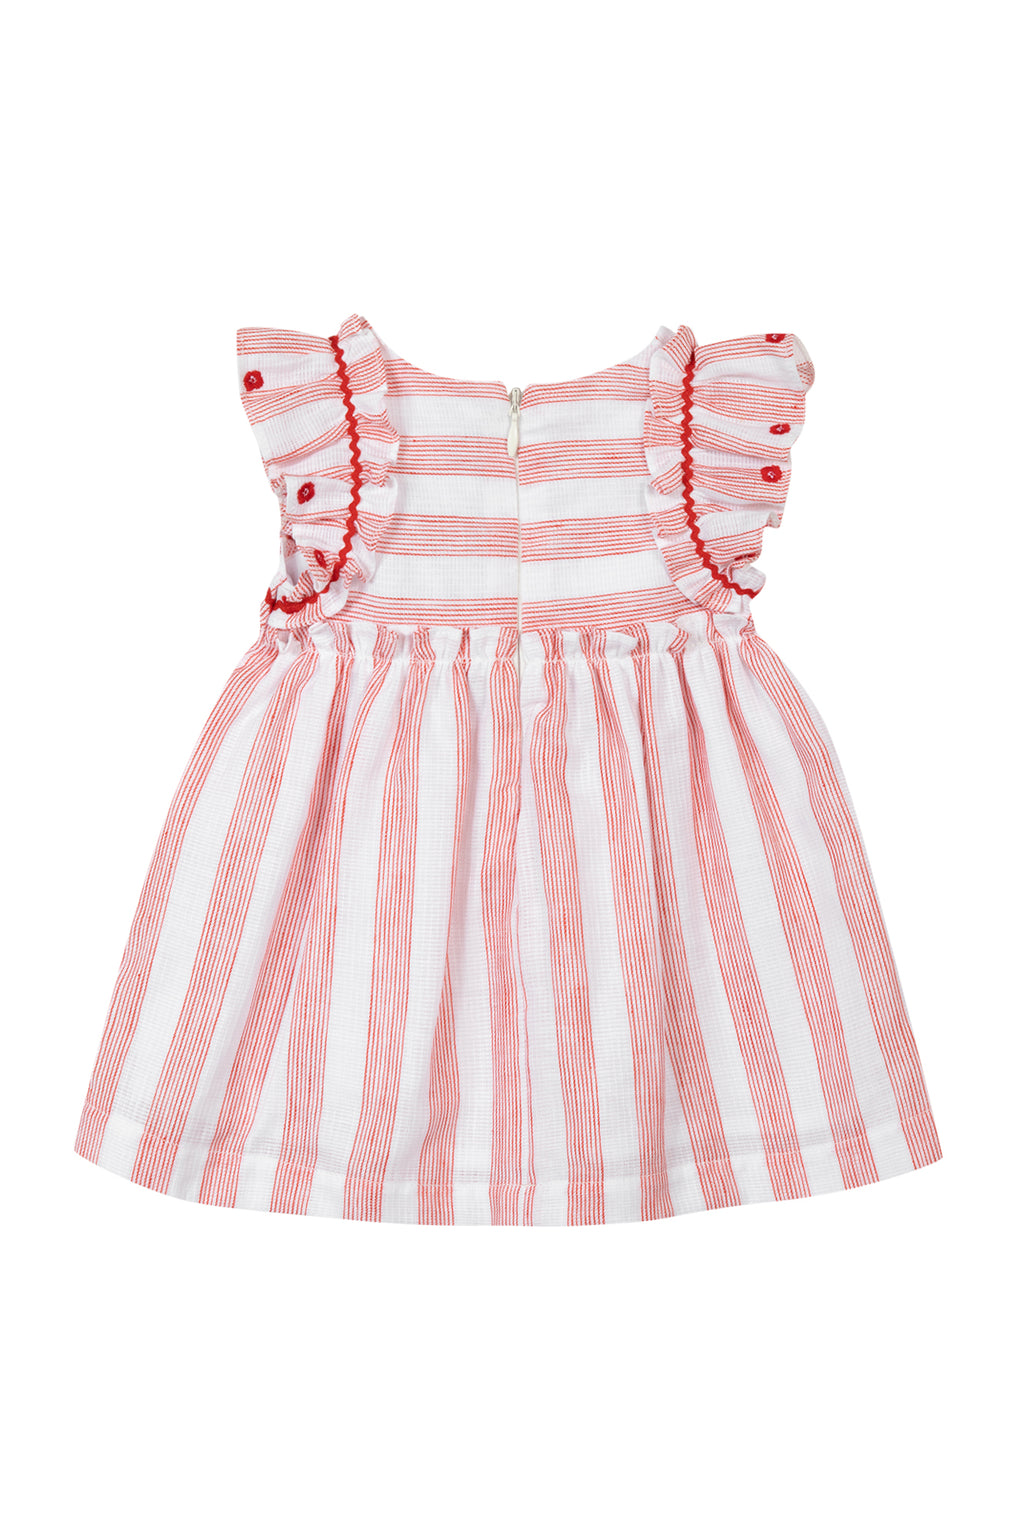 Dress - Coquelicot at Stripes